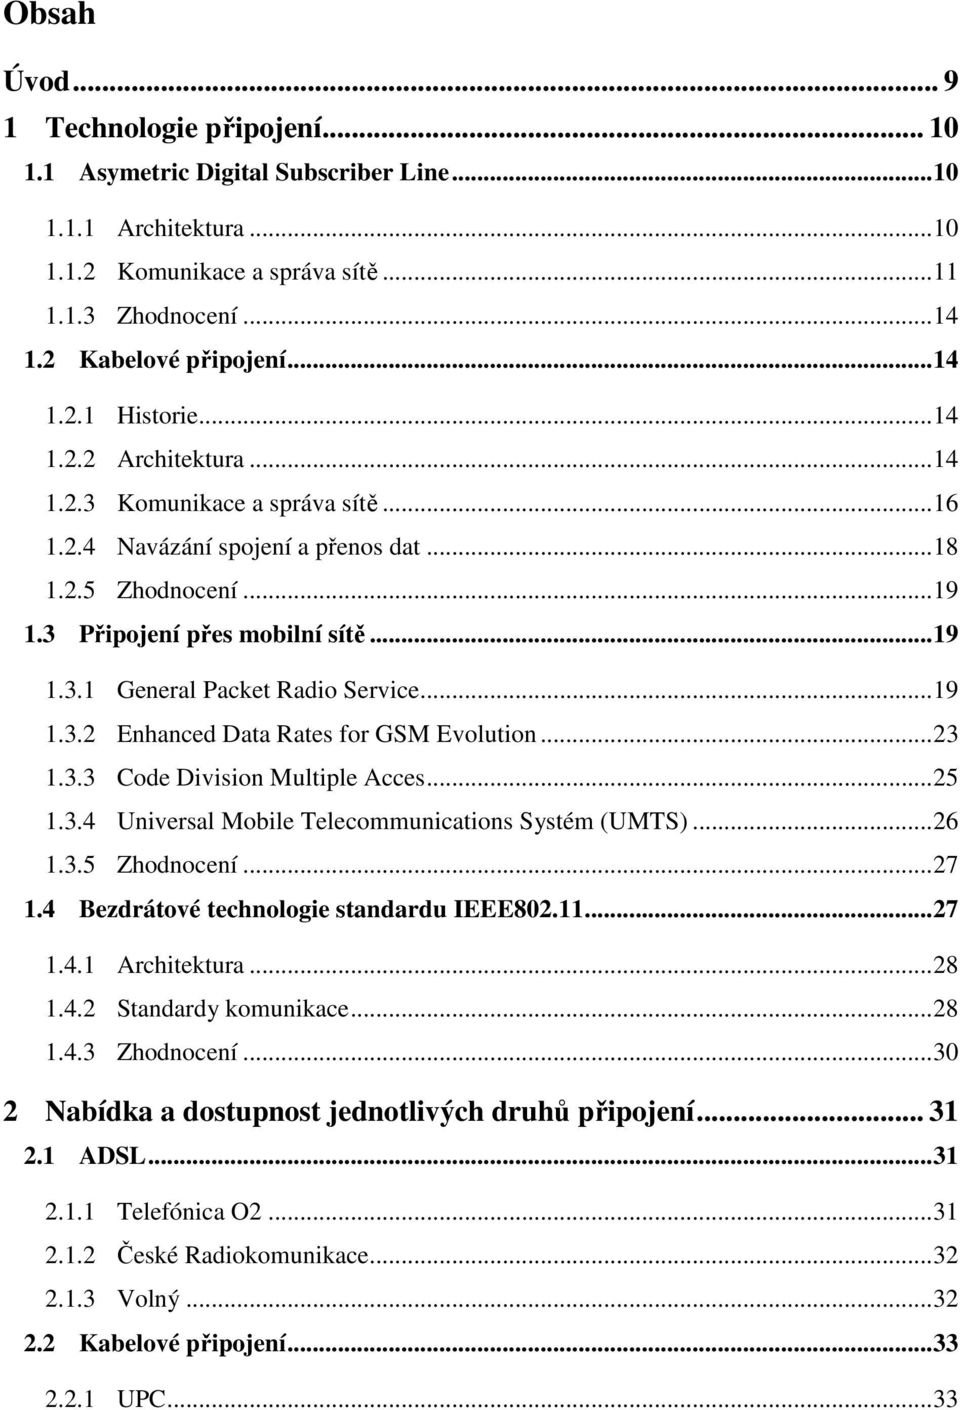 .. 19 1.3.2 Enhanced Data Rates for GSM Evolution... 23 1.3.3 Code Division Multiple Acces... 25 1.3.4 Universal Mobile Telecommunications Systém (UMTS)... 26 1.3.5 Zhodnocení... 27 1.